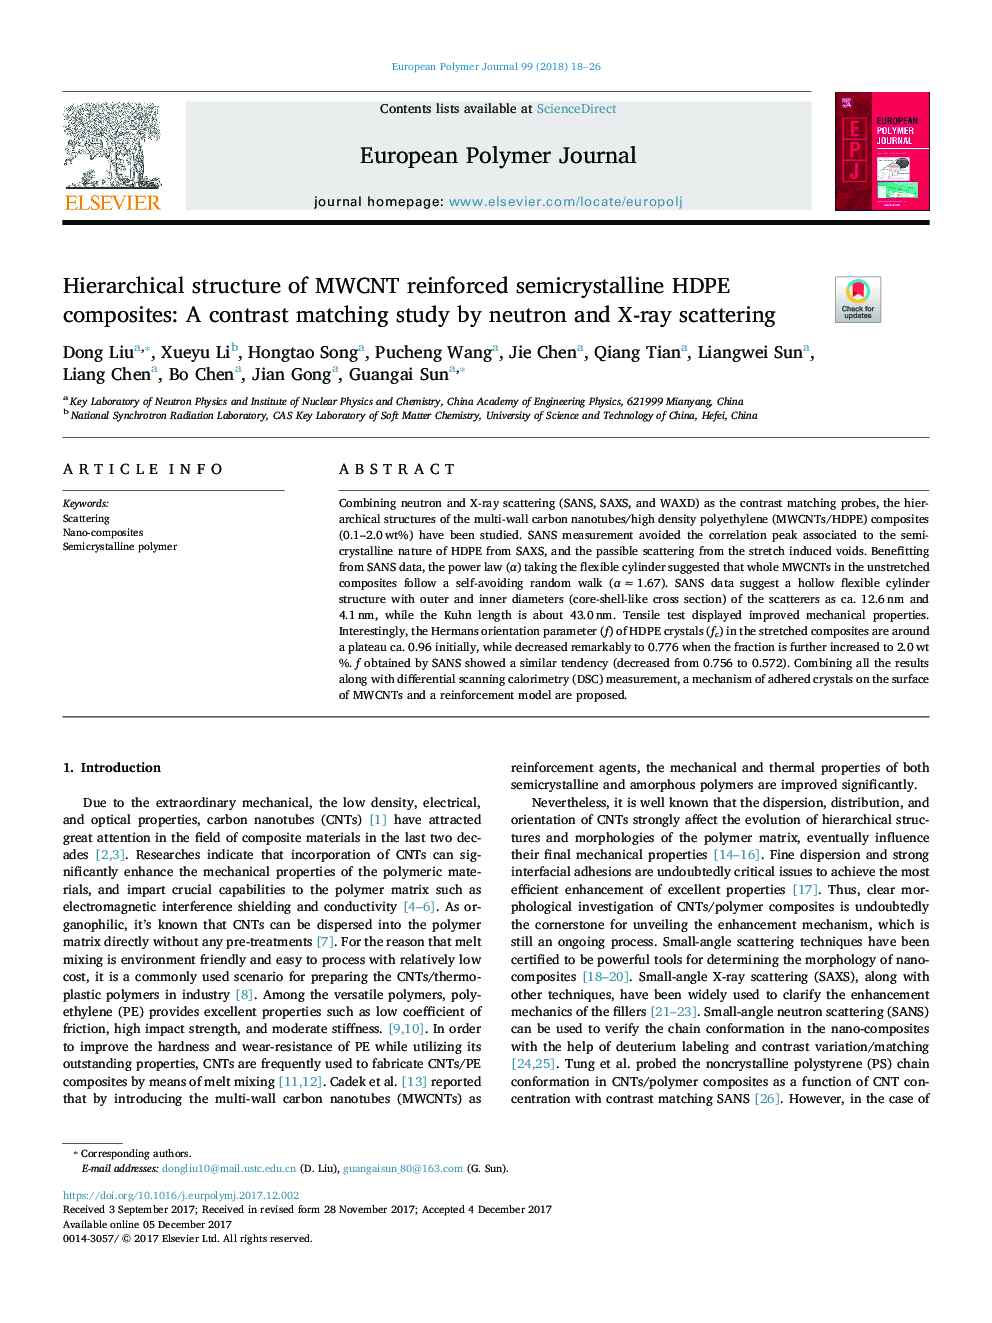 Hierarchical structure of MWCNT reinforced semicrystalline HDPE composites: A contrast matching study by neutron and X-ray scattering